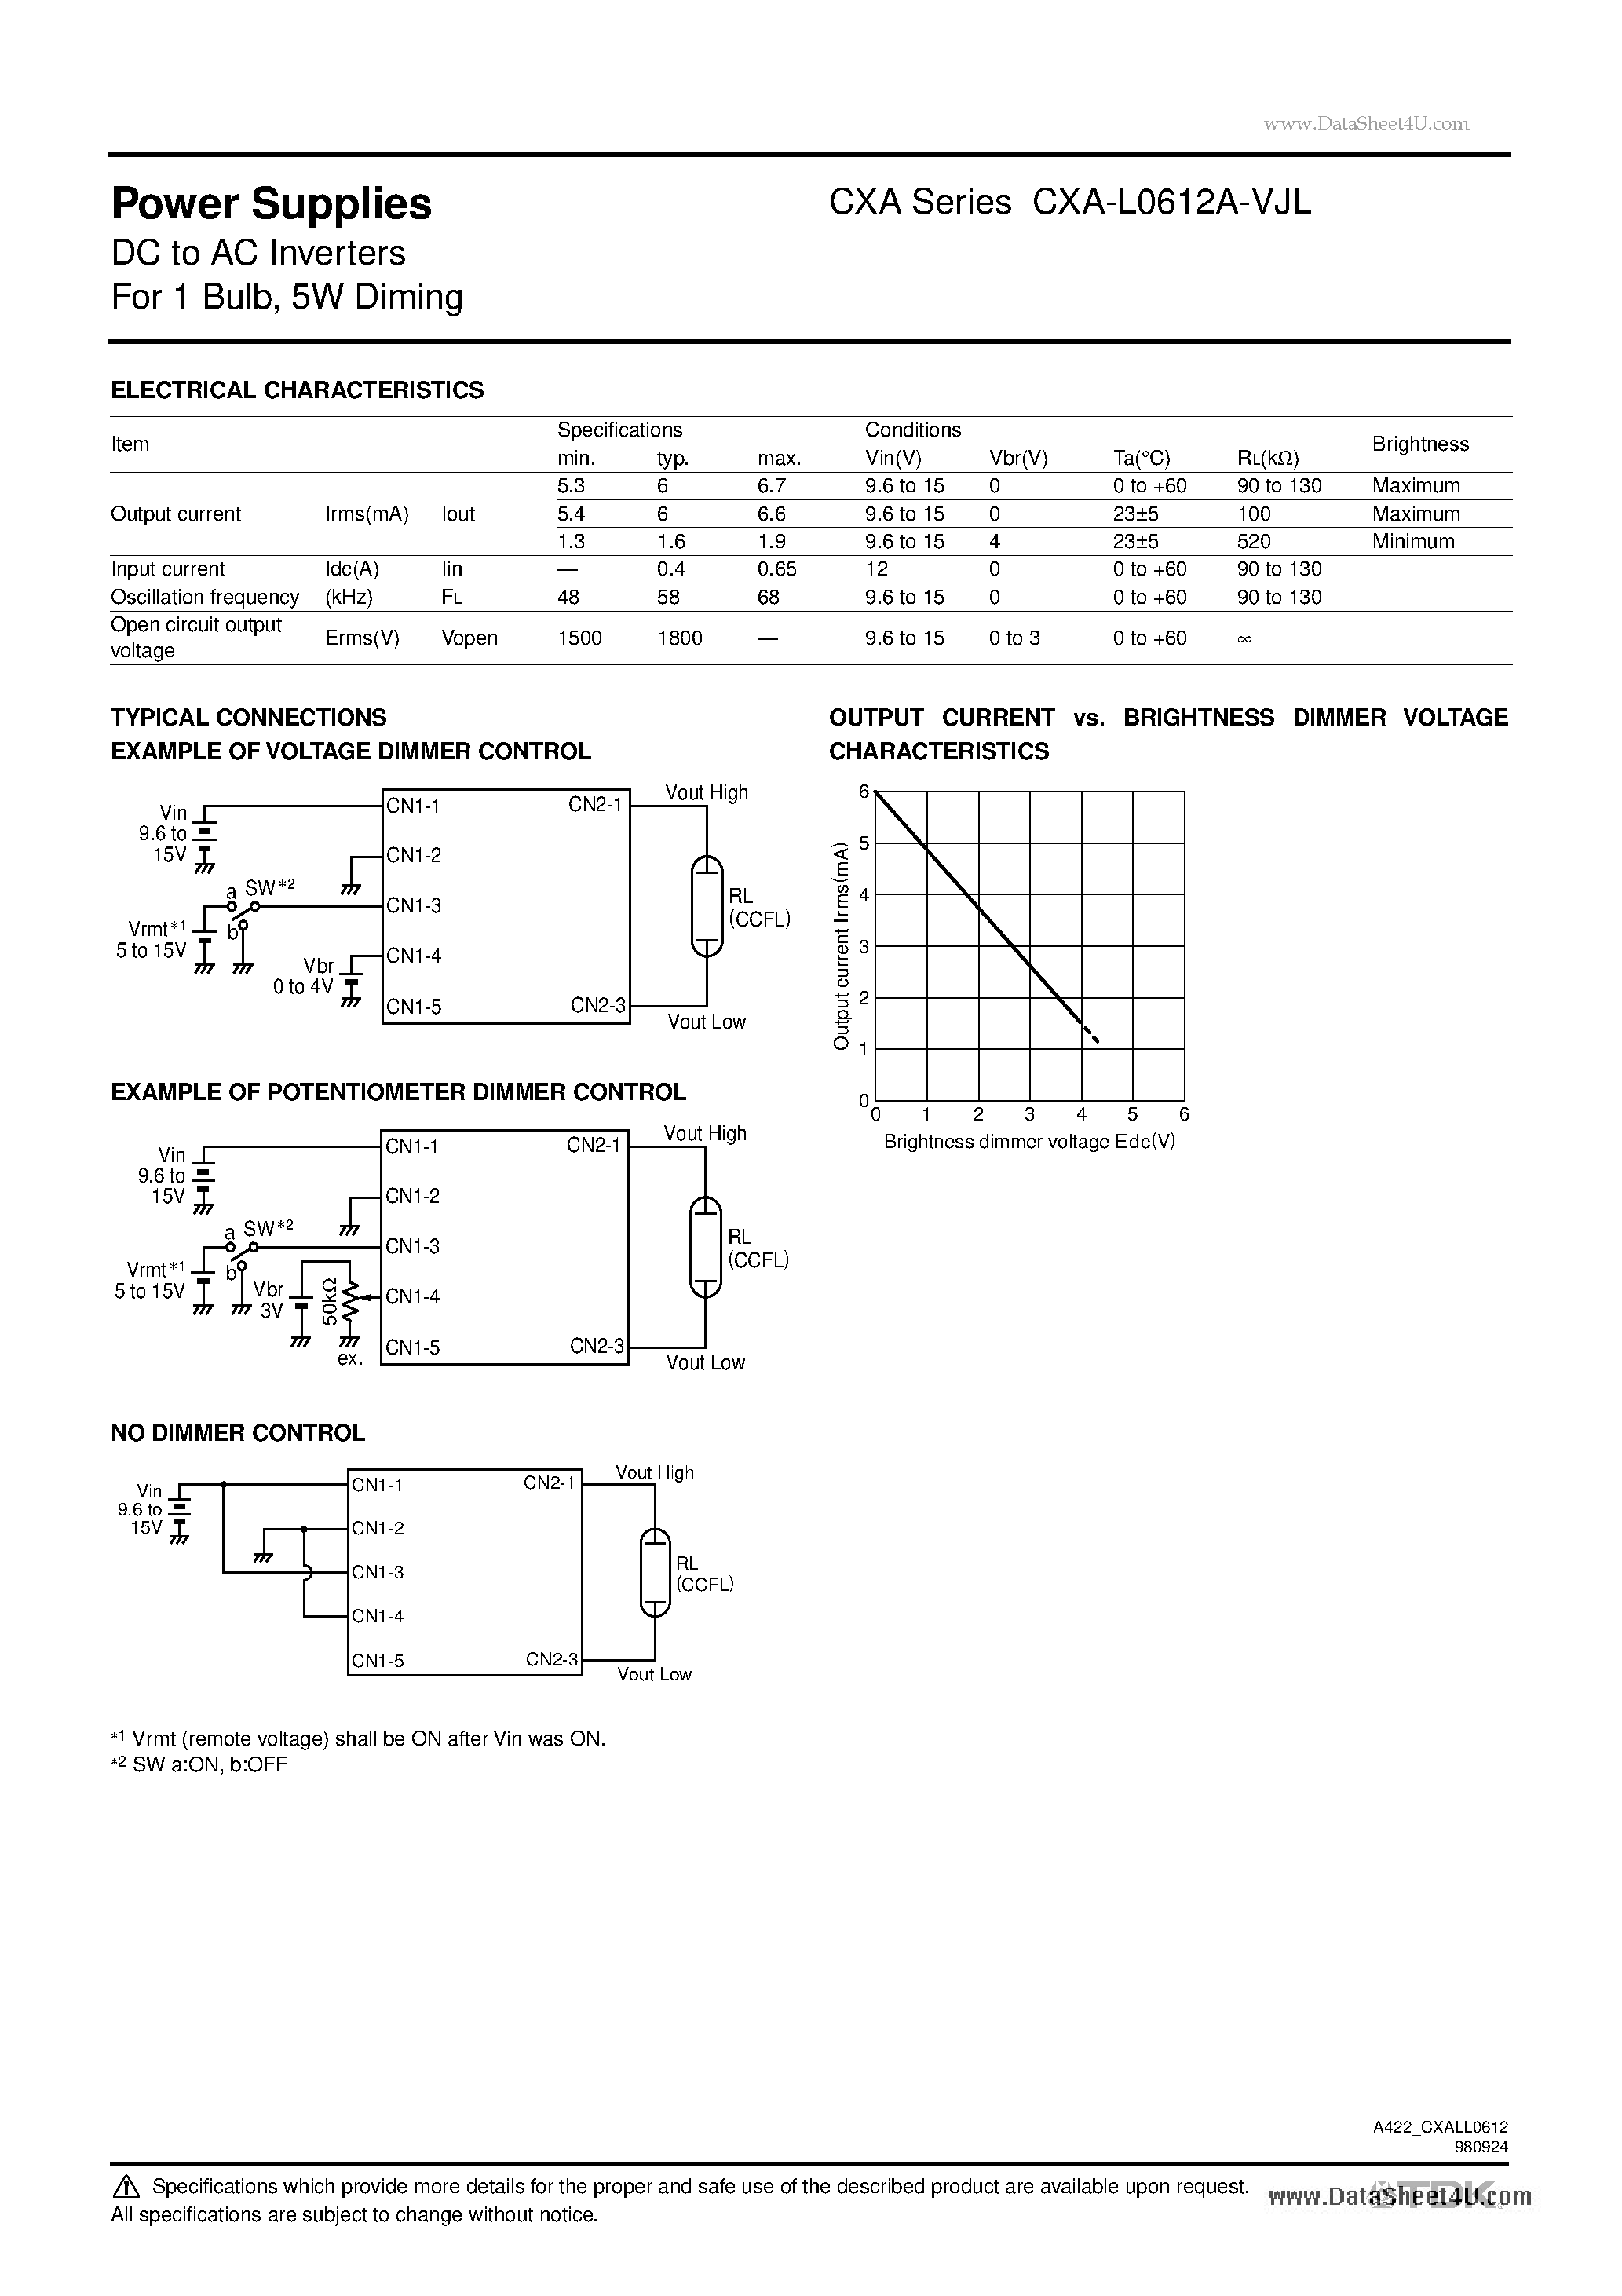 Datasheet CXA-L0612A-VJL - Power Supplies DC to AC Inverters page 2